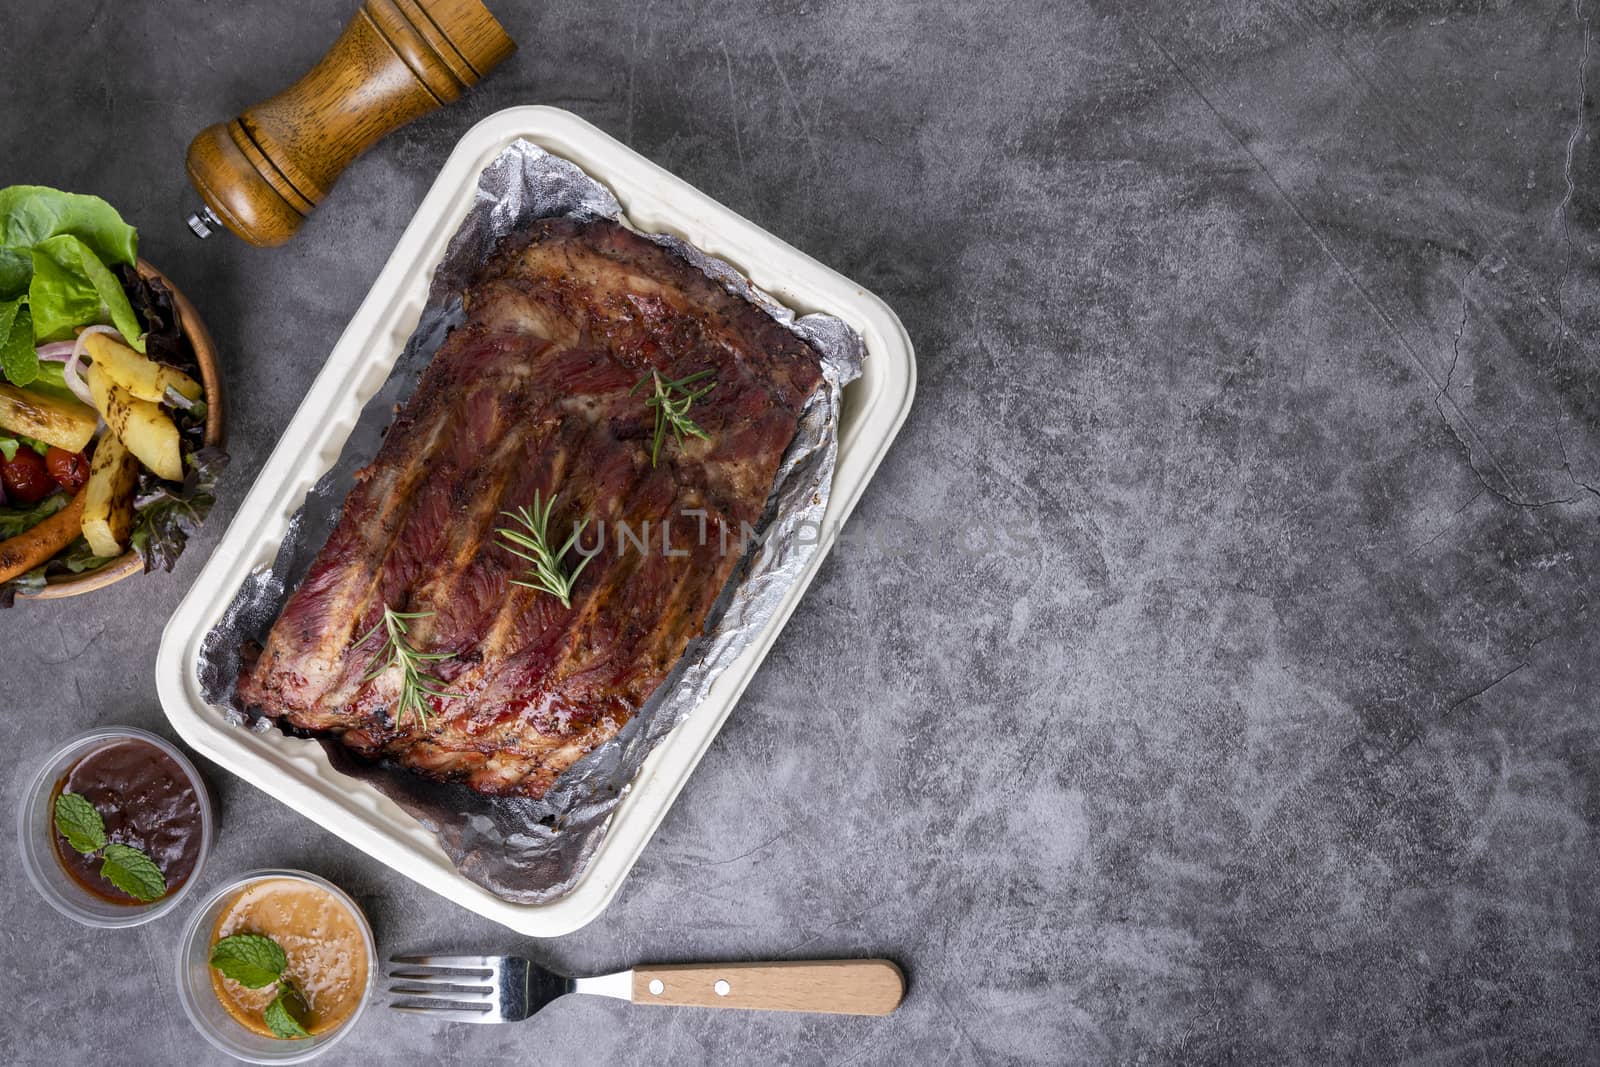 Grilled pork ribs with Vegetables and sauces on a drak table.